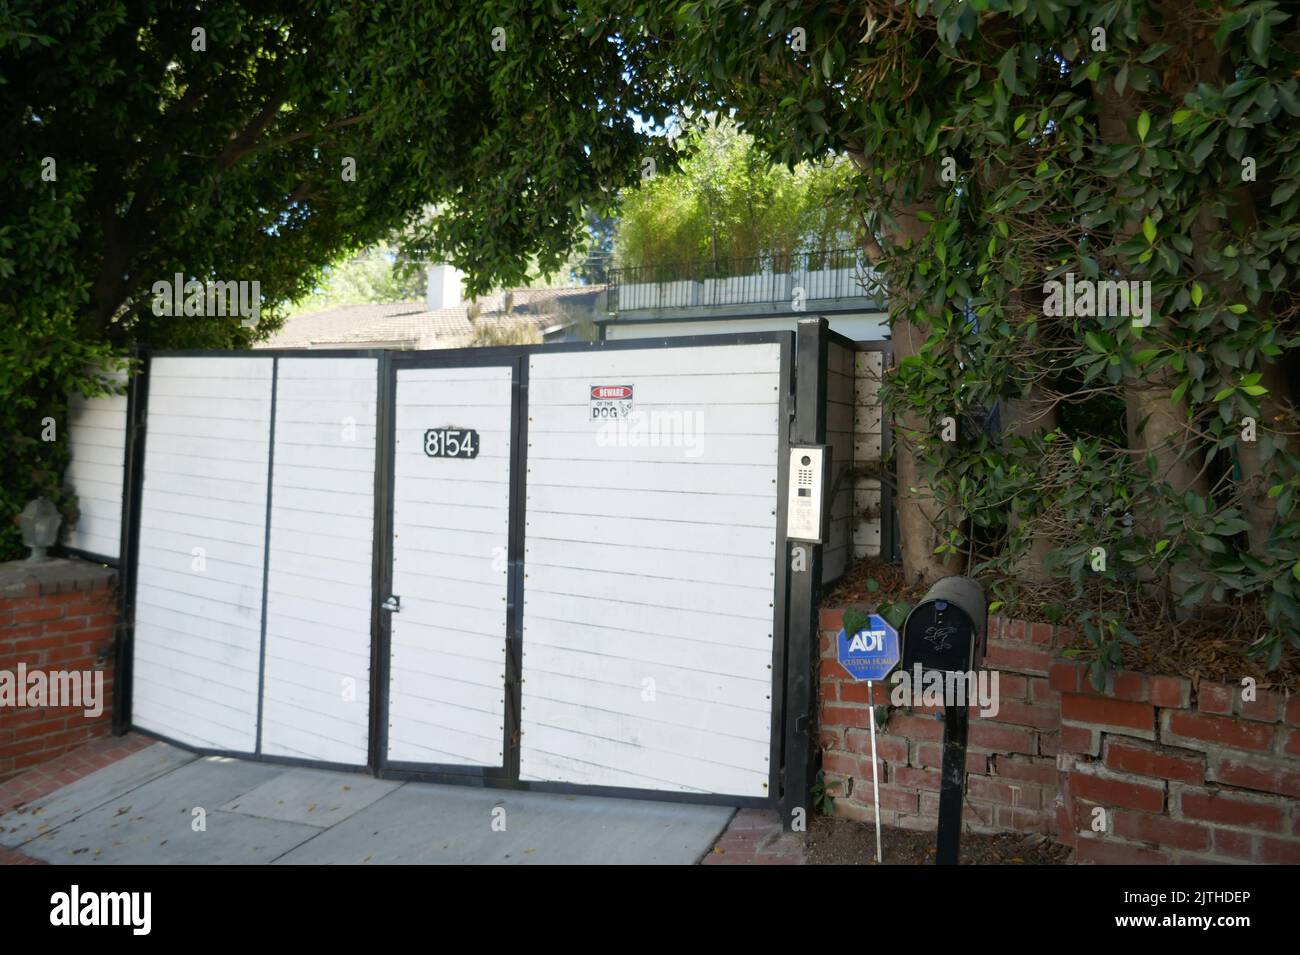 Los Angeles, California, USA 27th August 2022 Actor Joaquin Phoenix Home/house on August 27, 2022 in Los Angeles, California, USA. Photo by Barry King/Alamy Stock Photo Stock Photo